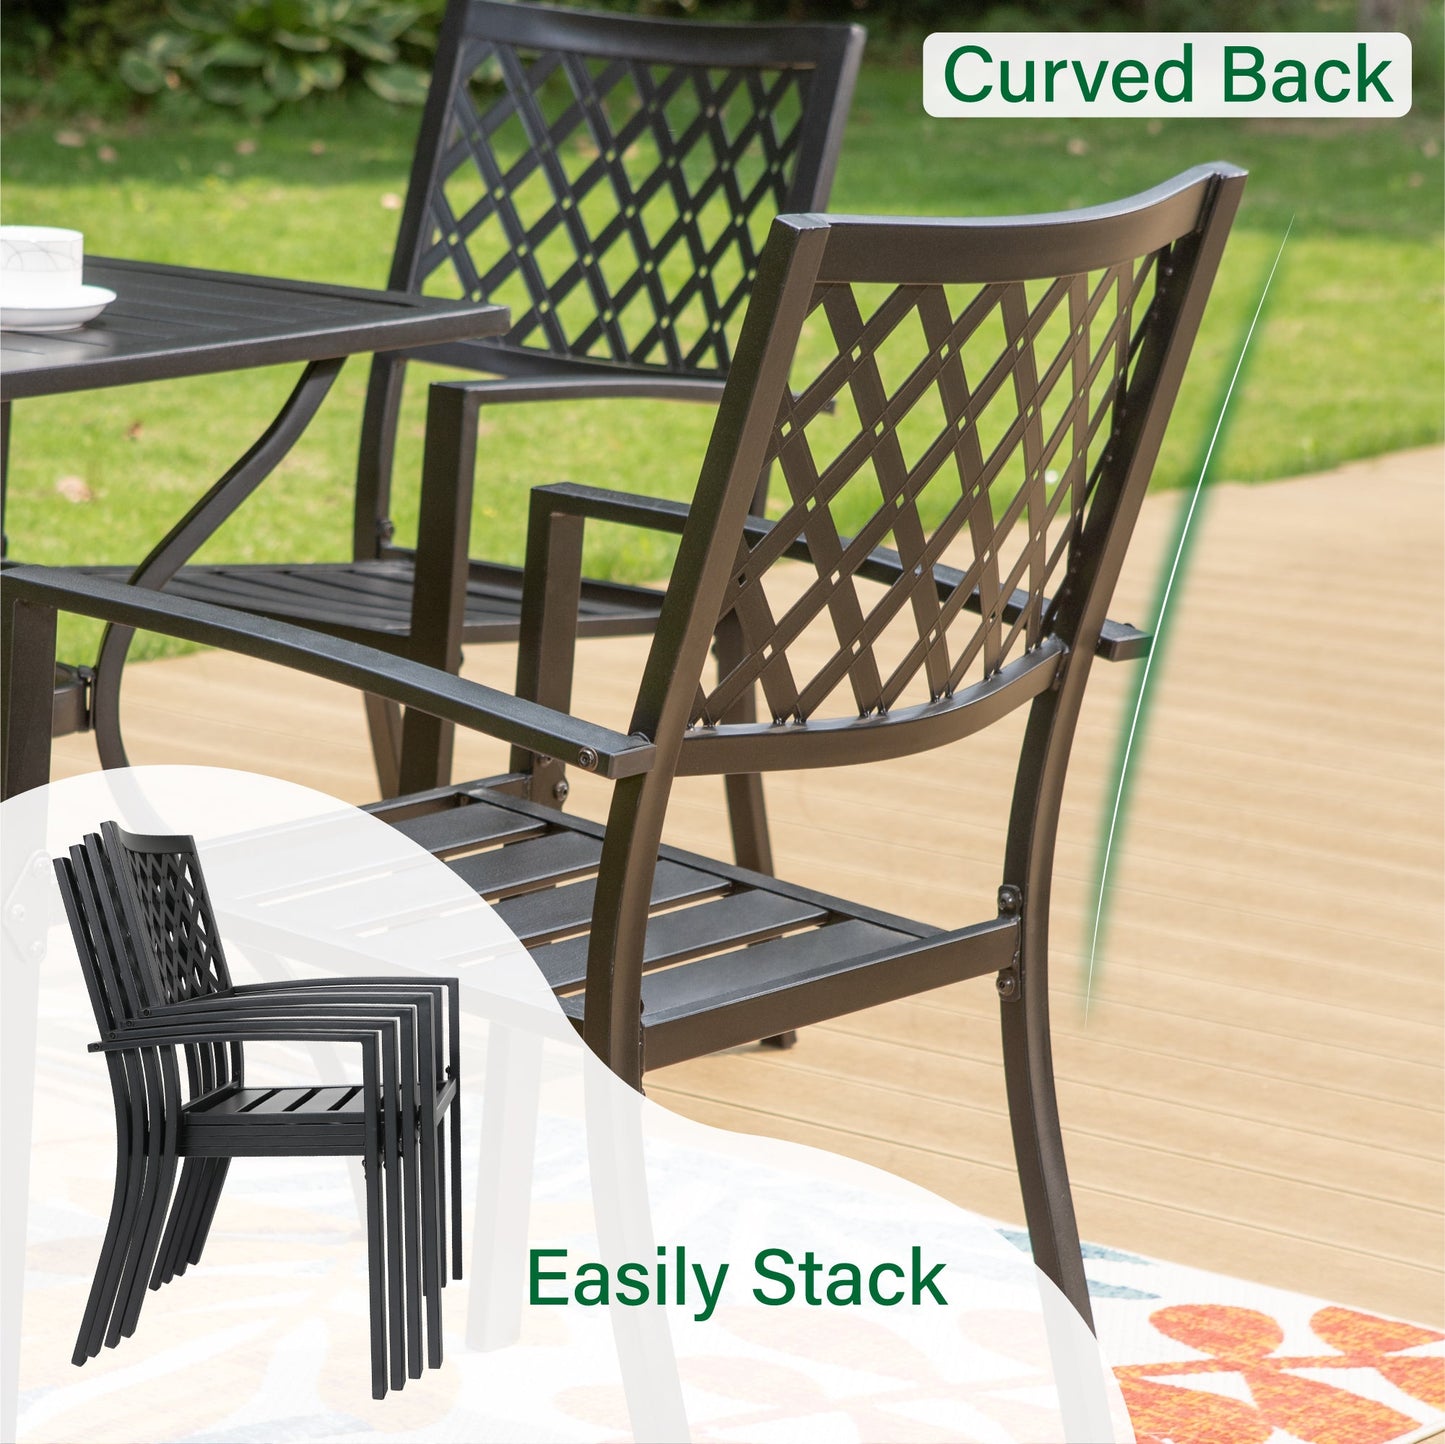 Sophia & William 9 Piece Outdoor Metal Patio Dining Set 60 Teak Wood Square Table and Chairs Furniture Set for 8, Brown